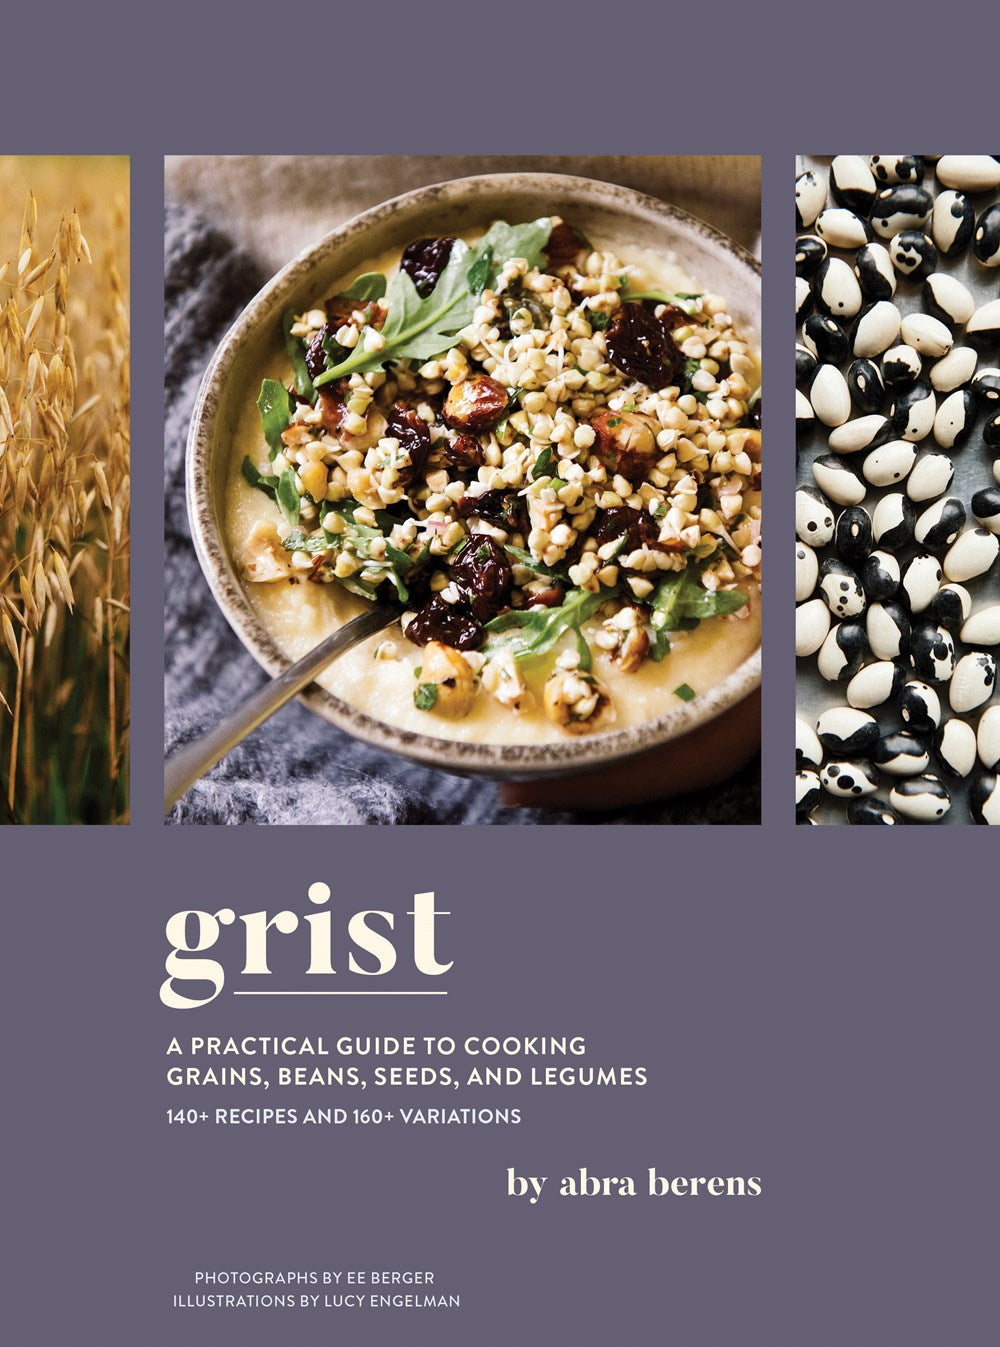 Grist: A Practical Guide to Cooking with Grains, Beans, Seeds, and Legumes by Abra Berens